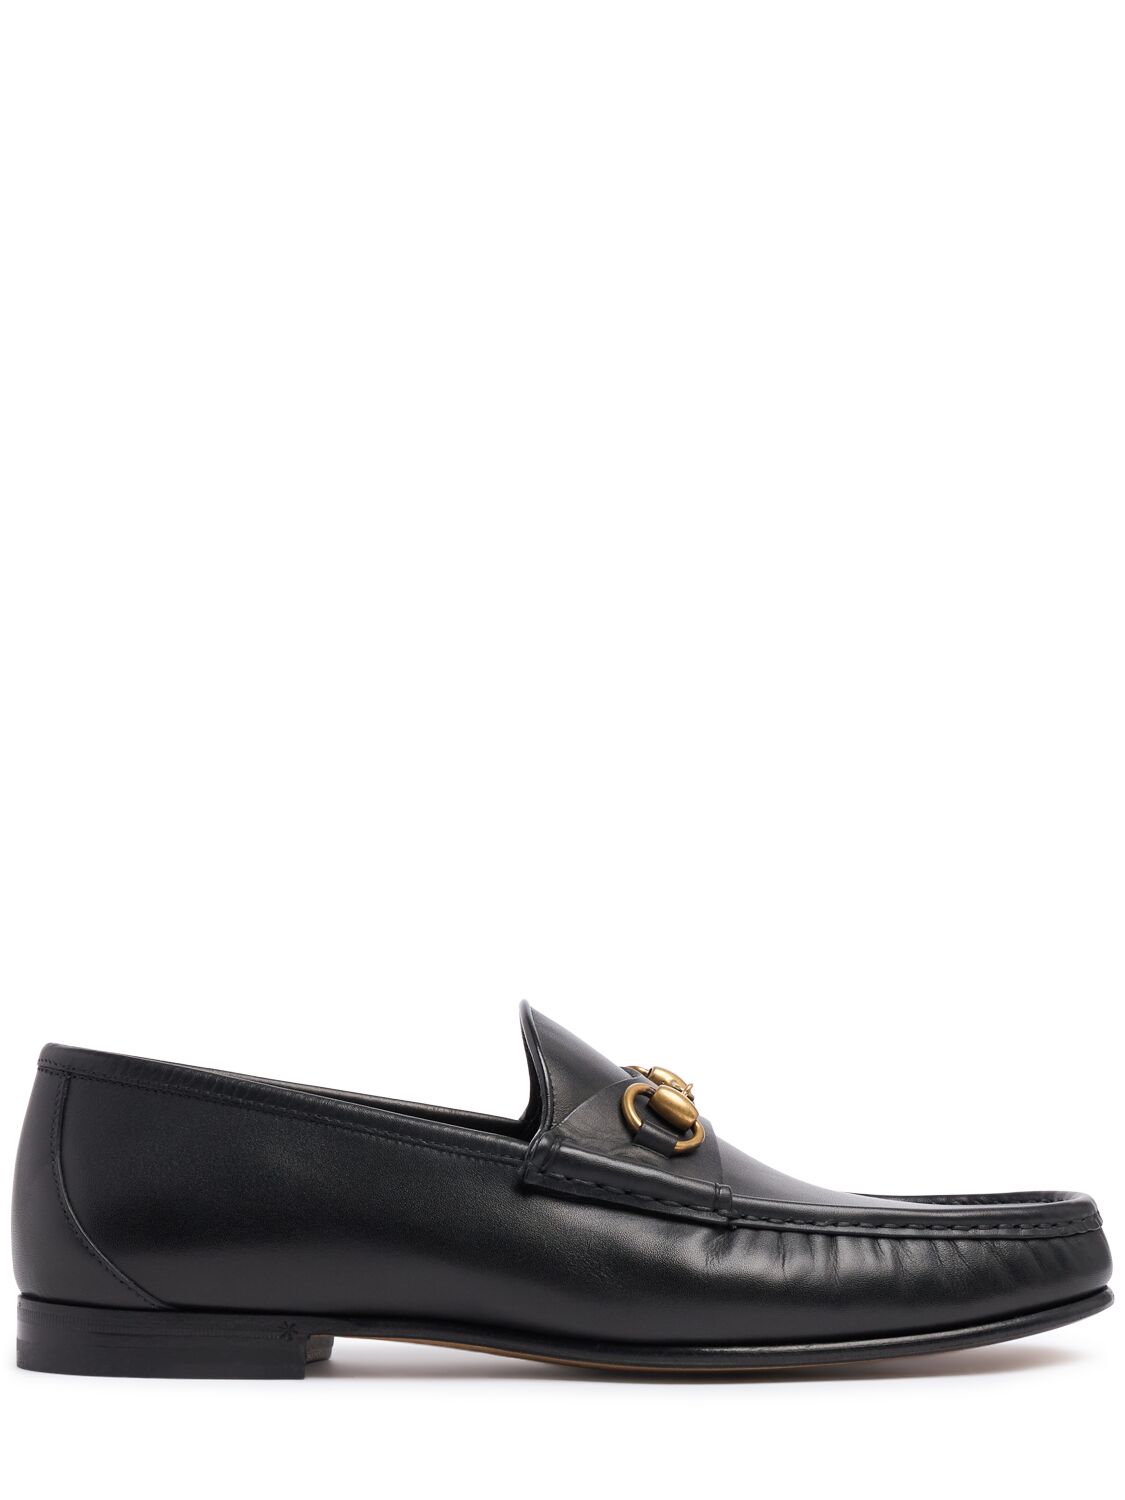 Gucci 1953 Horsebit Leather Loafer In Black